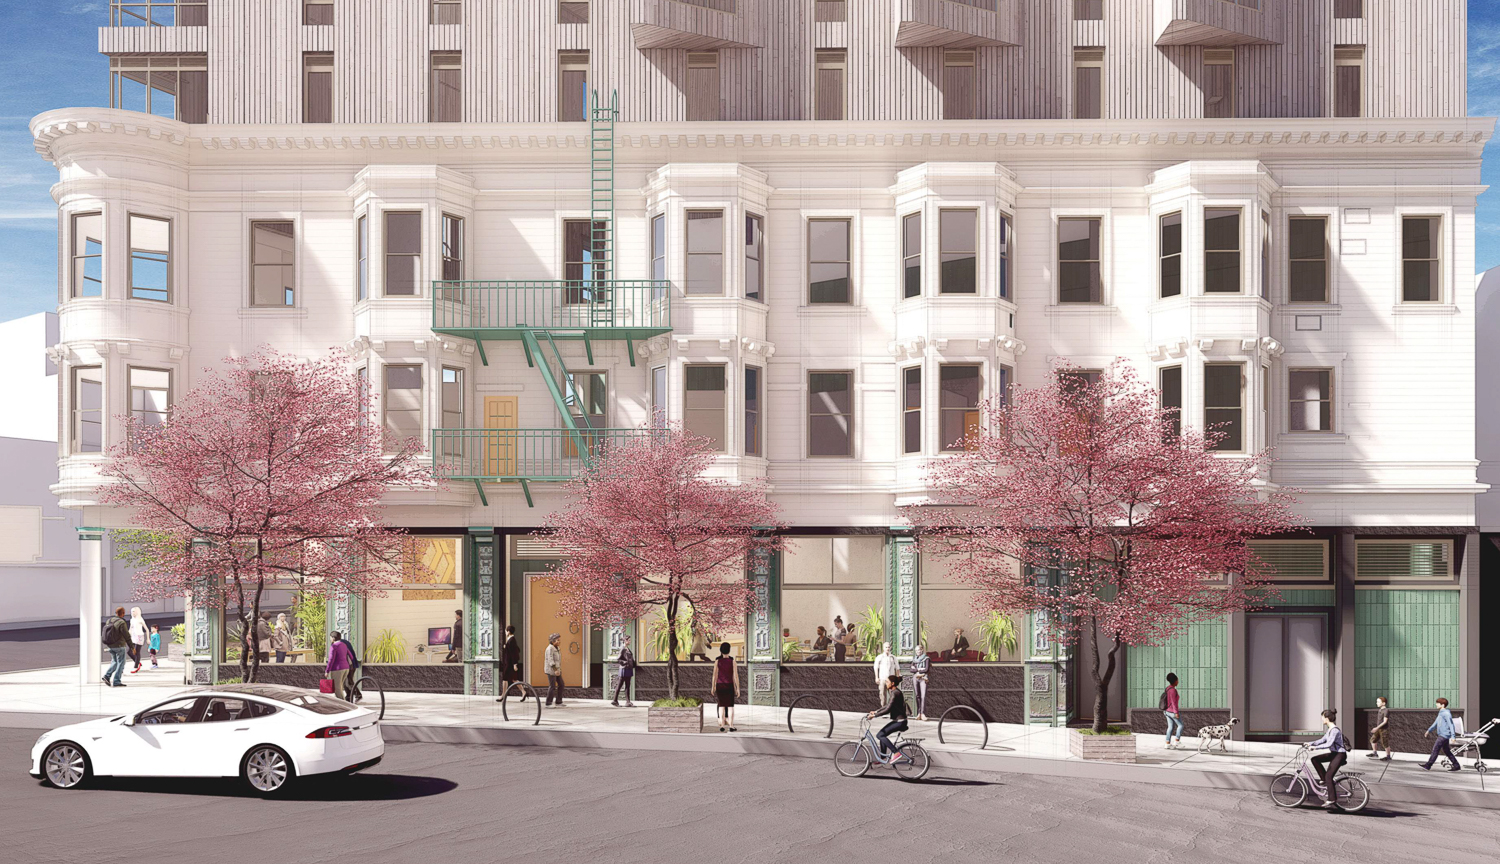 3300 Mission Street, rendering by BAR Architects